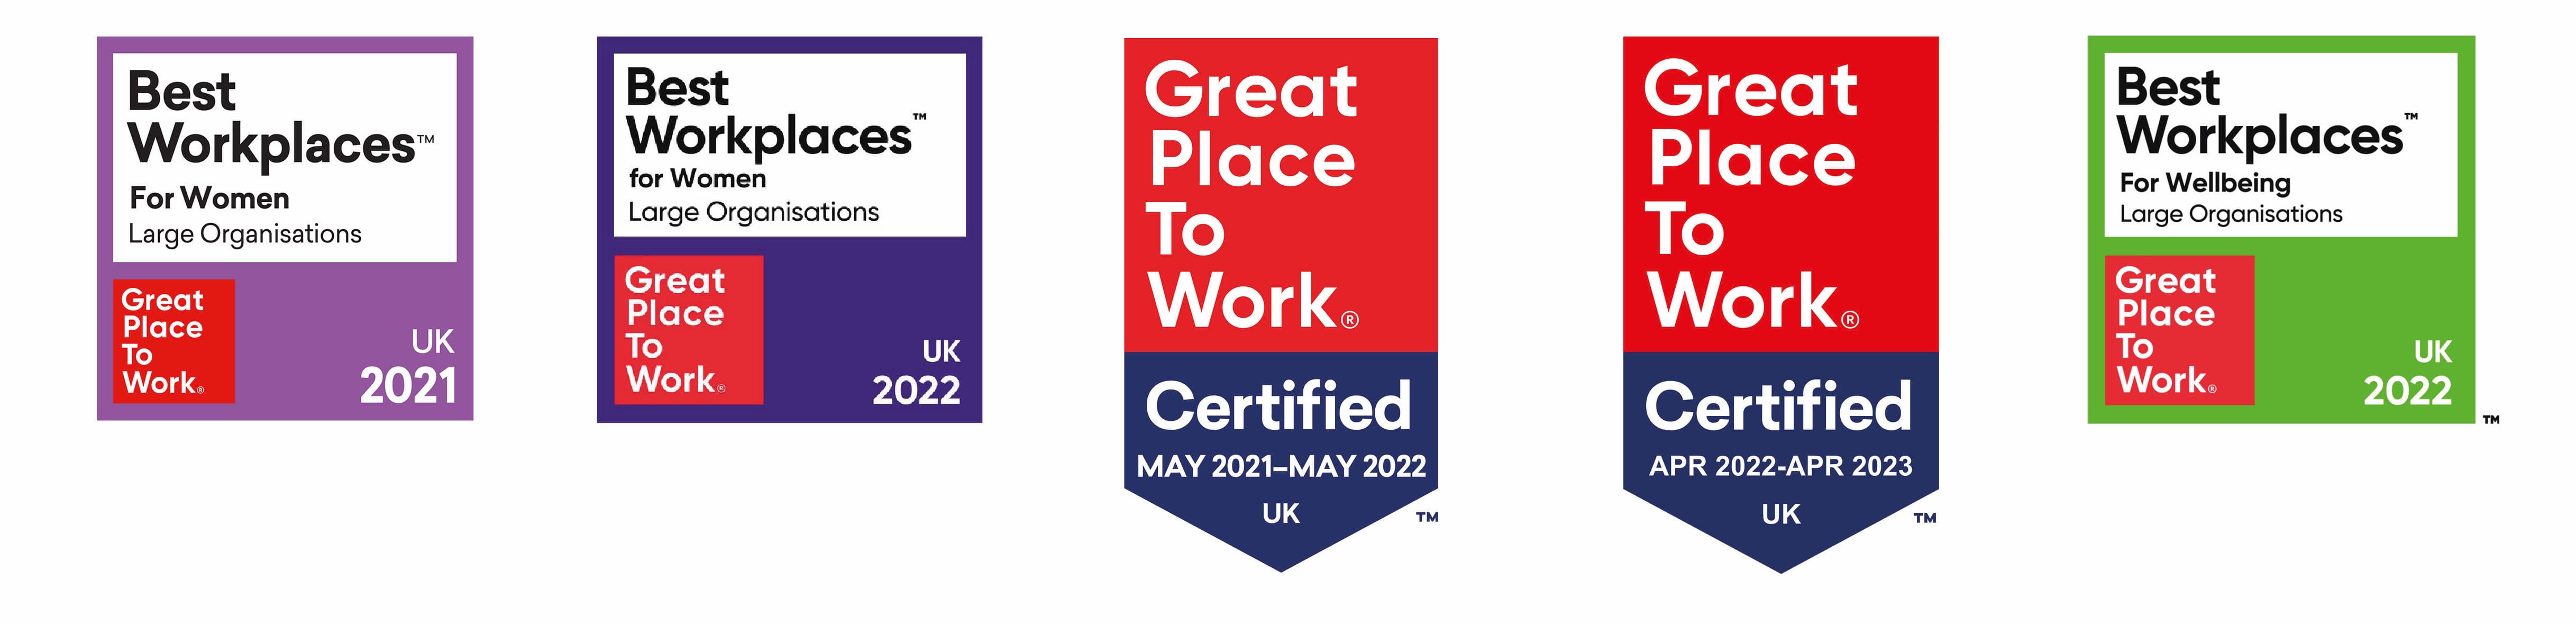 Great places to work logos